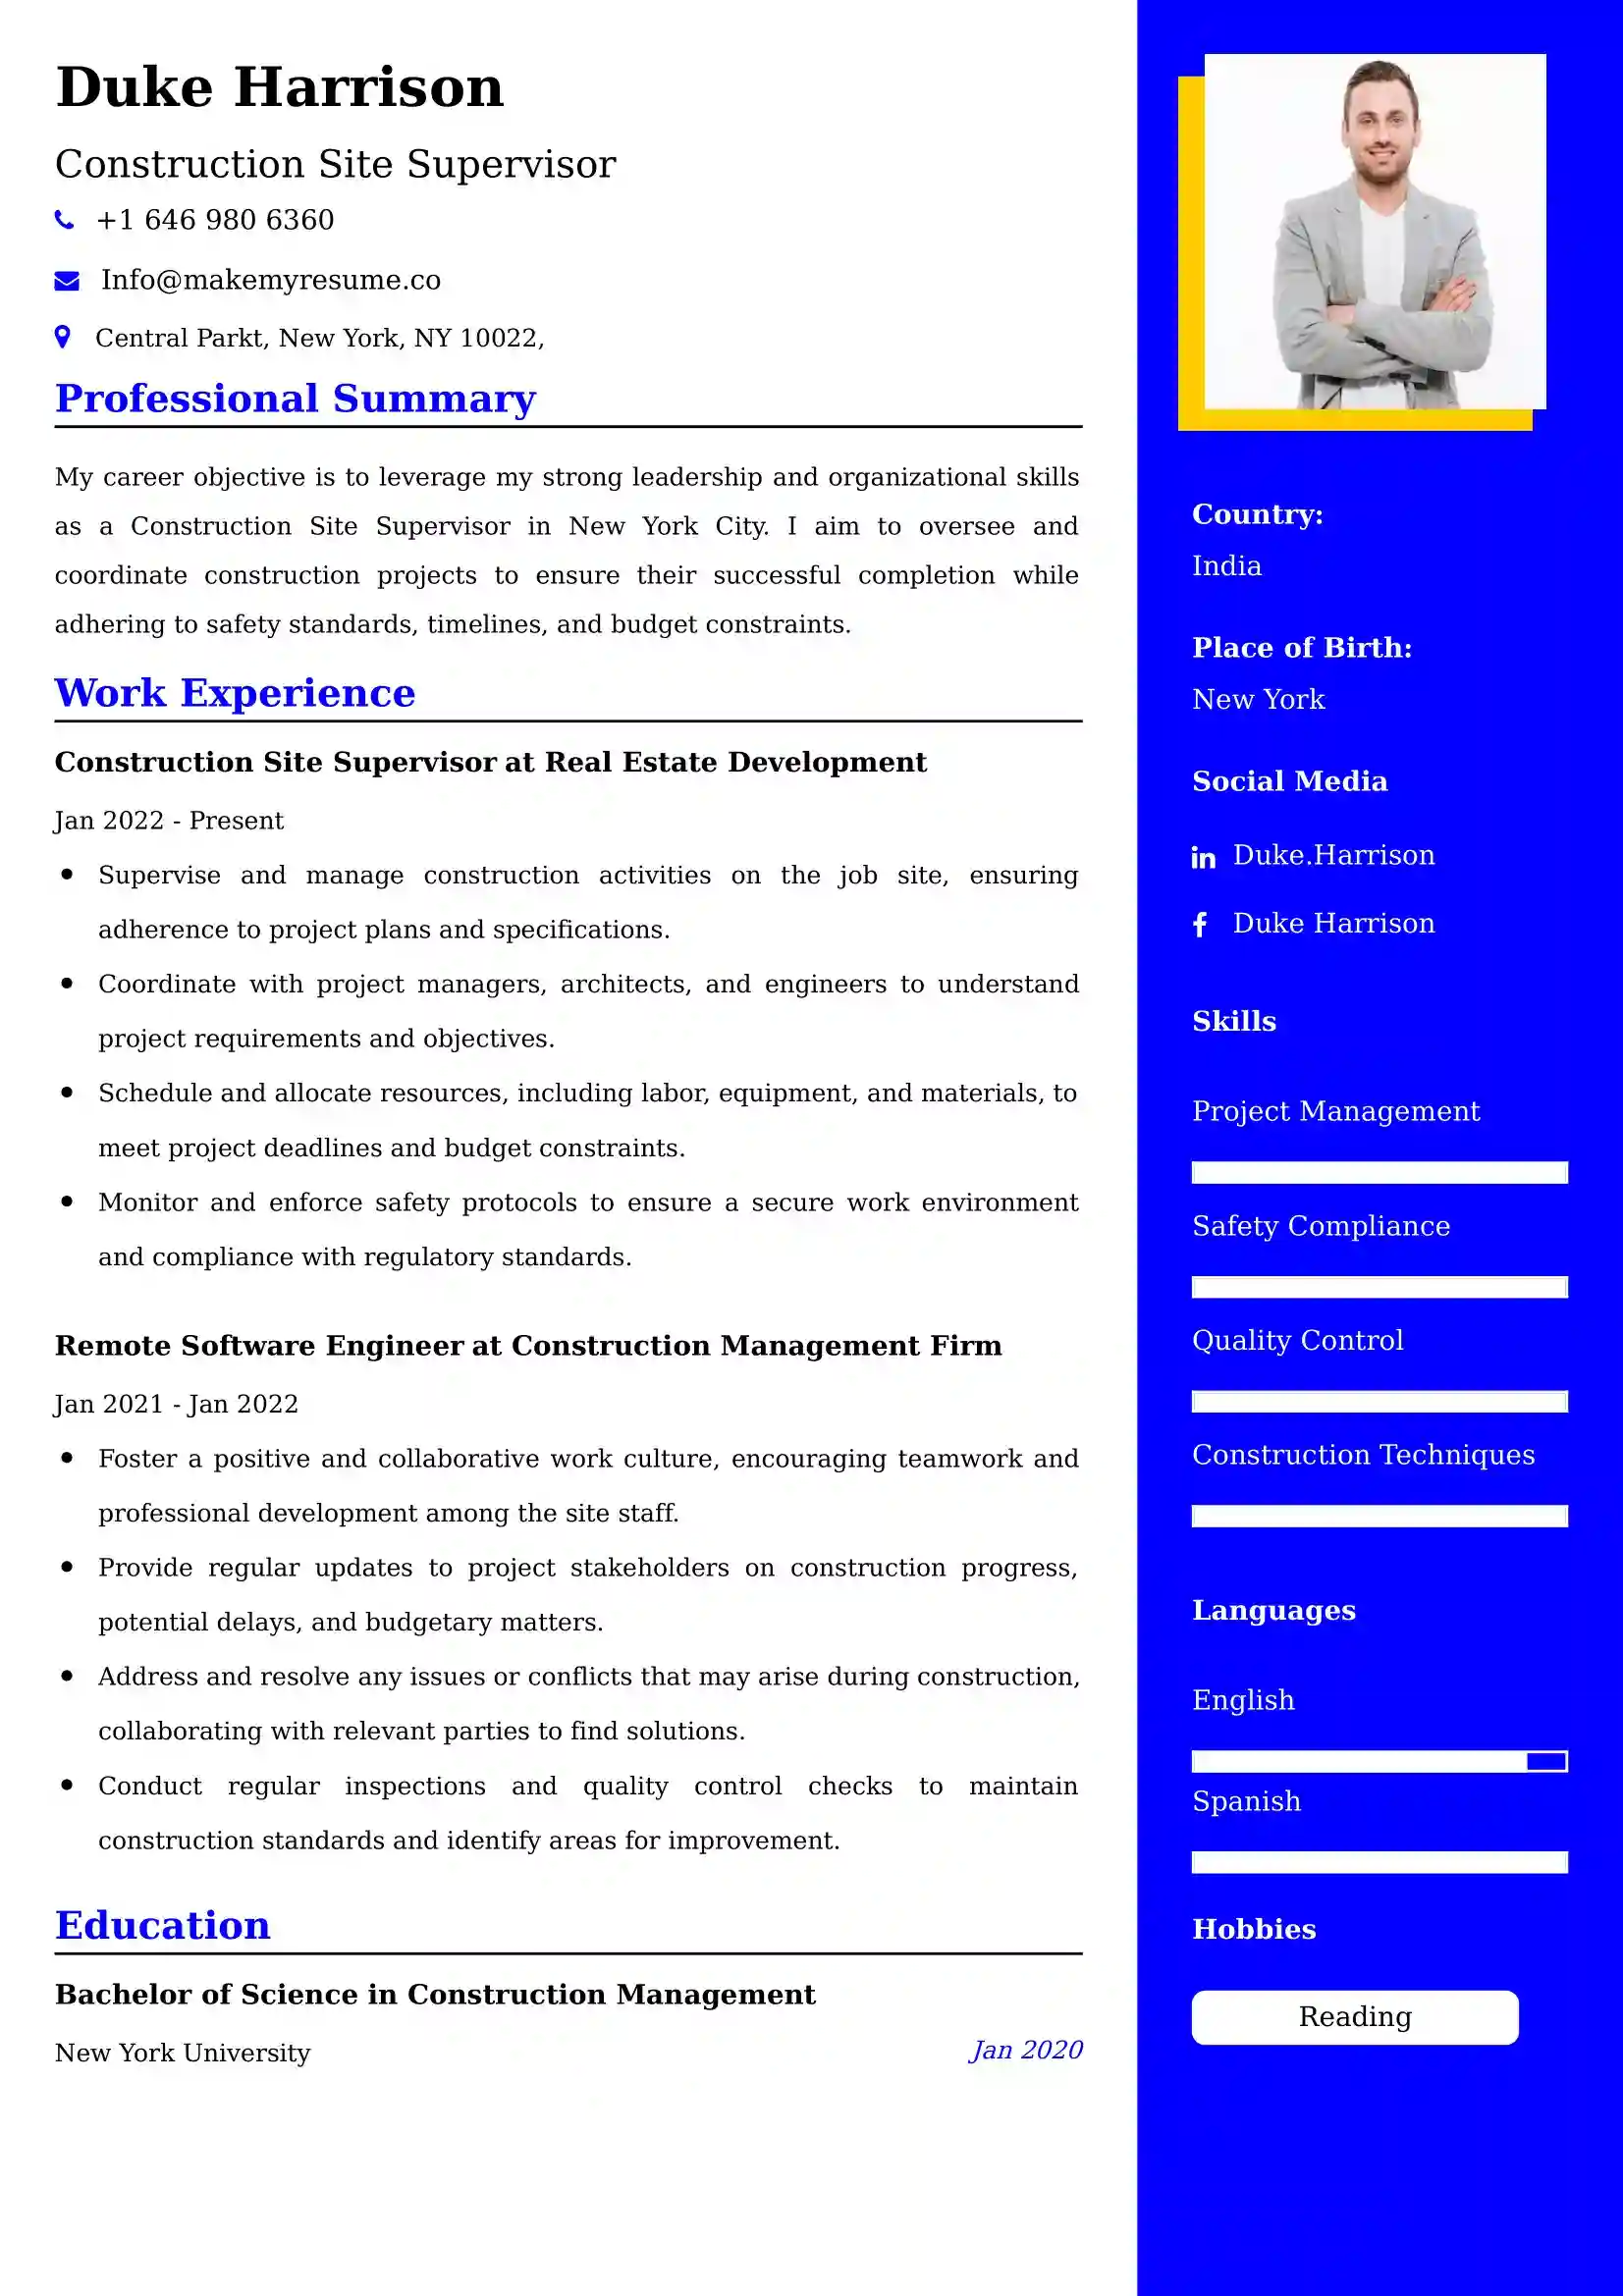 Construction Site Supervisor Resume Examples - UK Format, Latest Template.